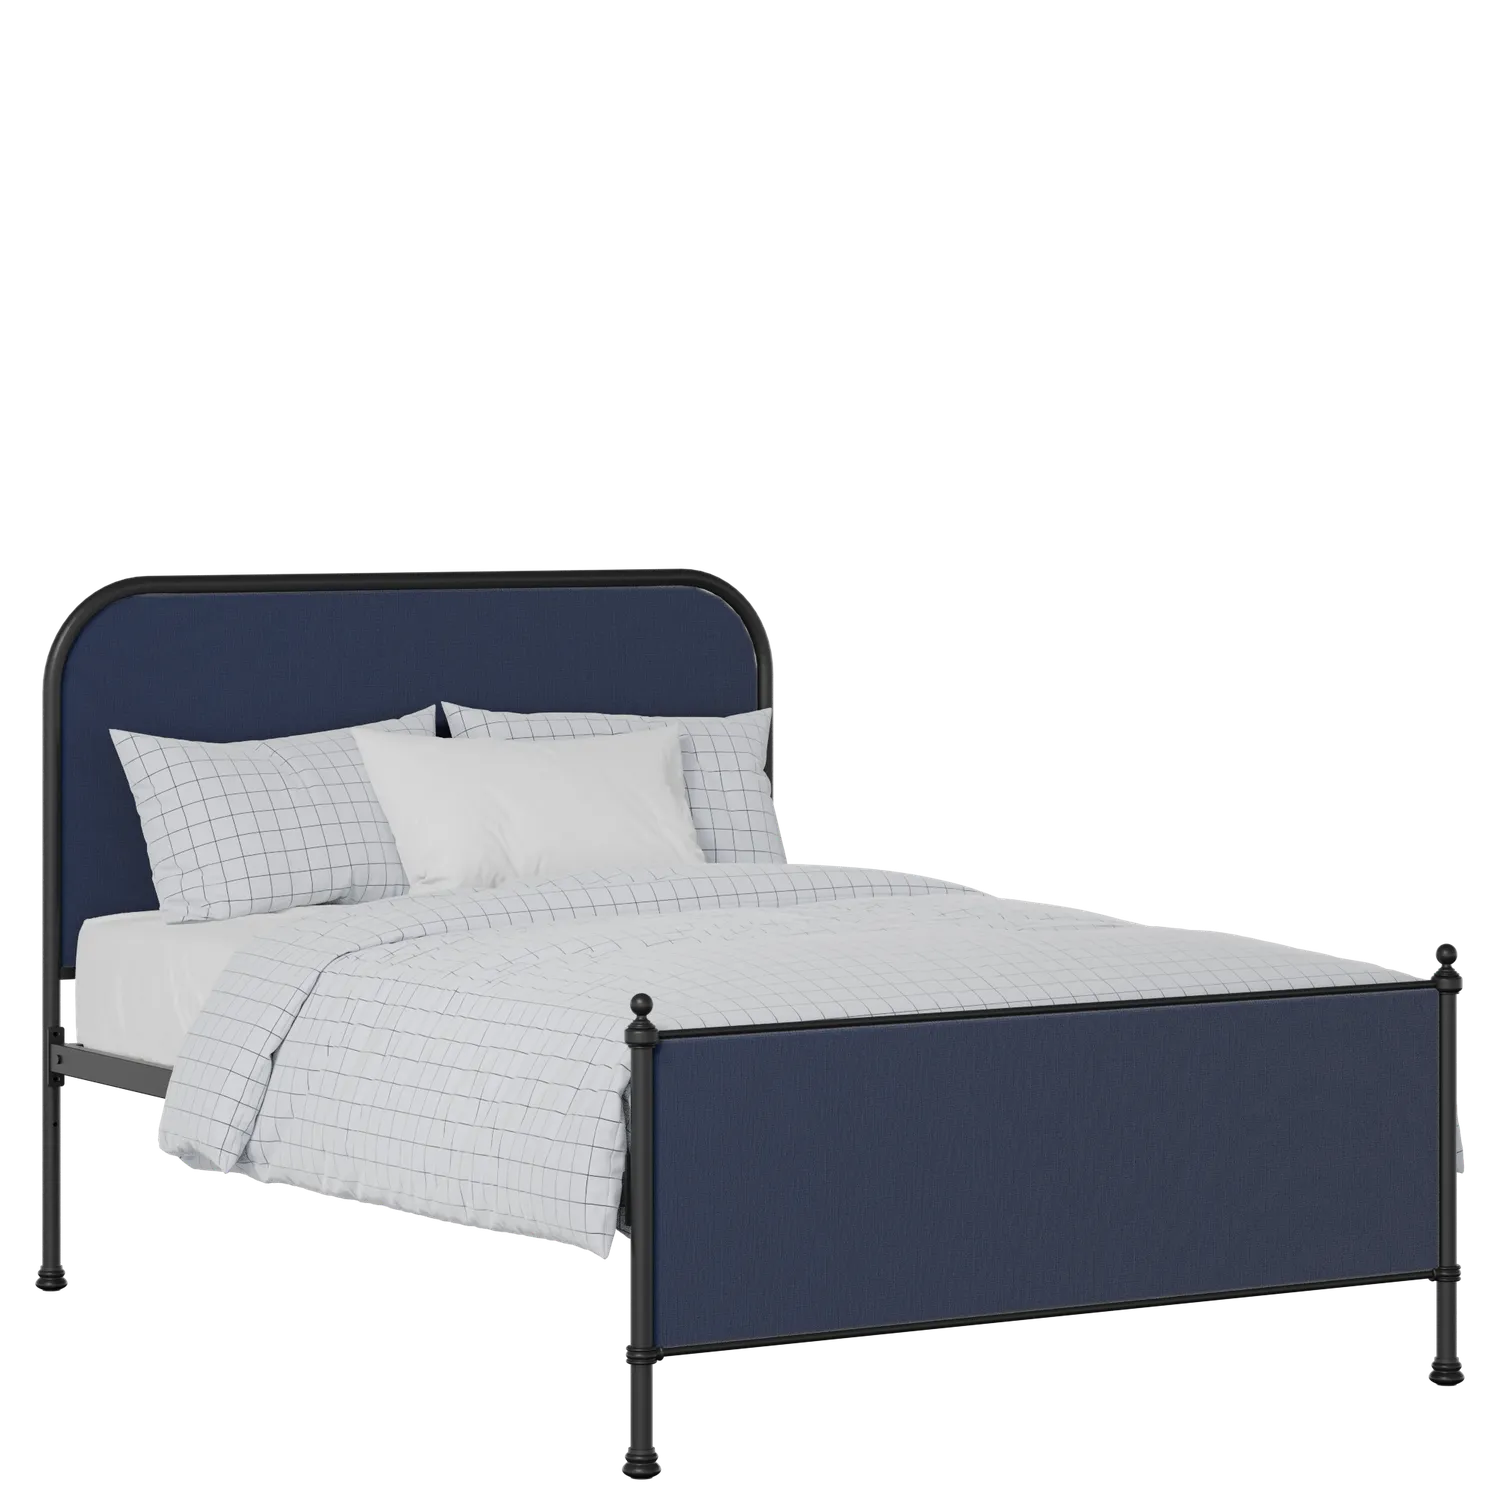 Bray iron/metal upholstered bed in black with blue fabric